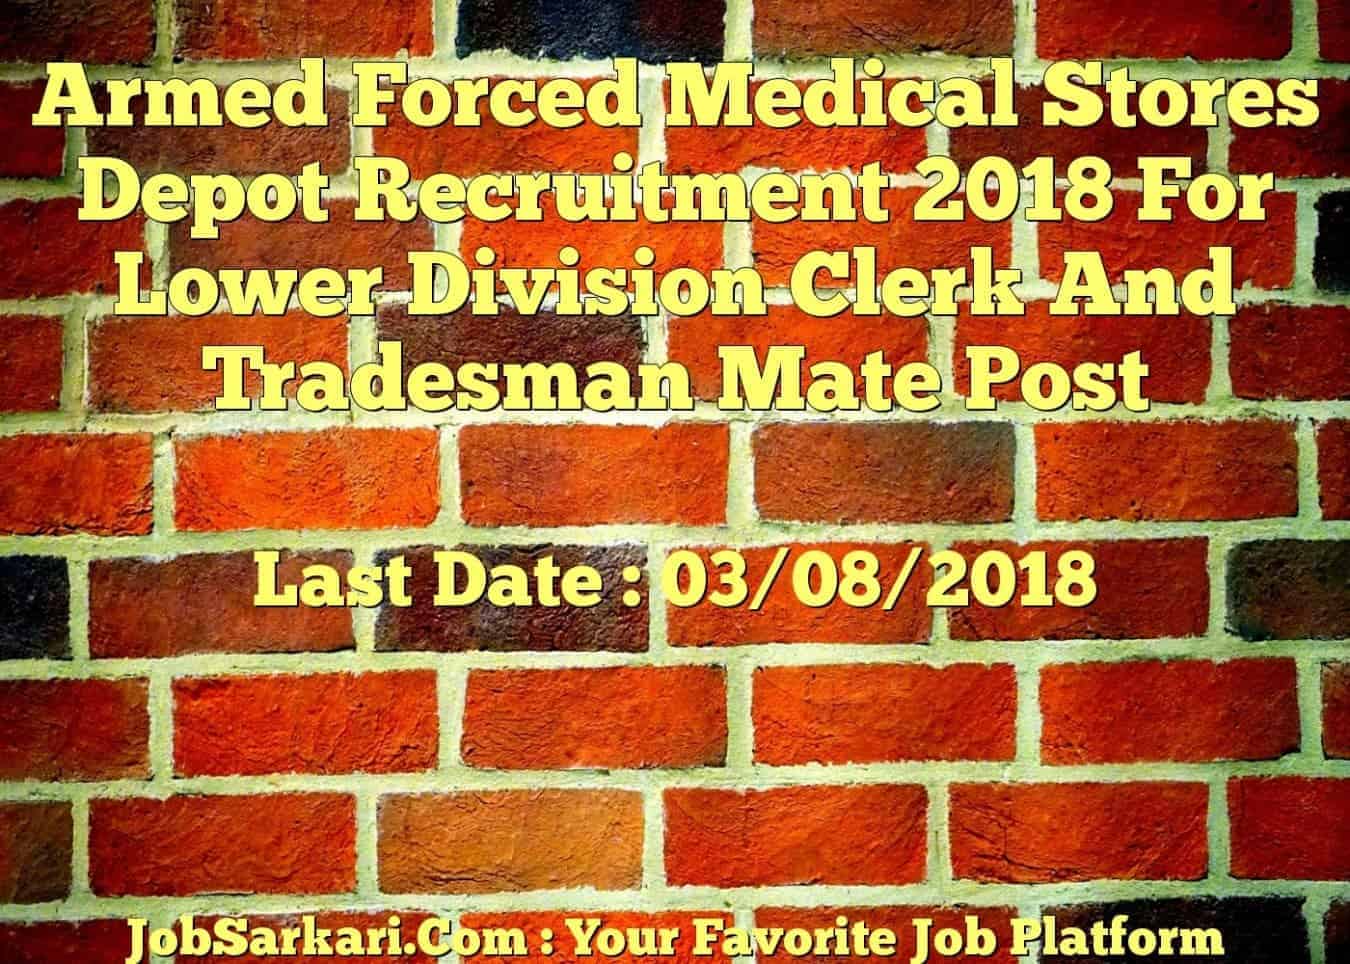 AFMSD Recruitment 2018 For Lower Division Clerk And Tradesman Mate Post